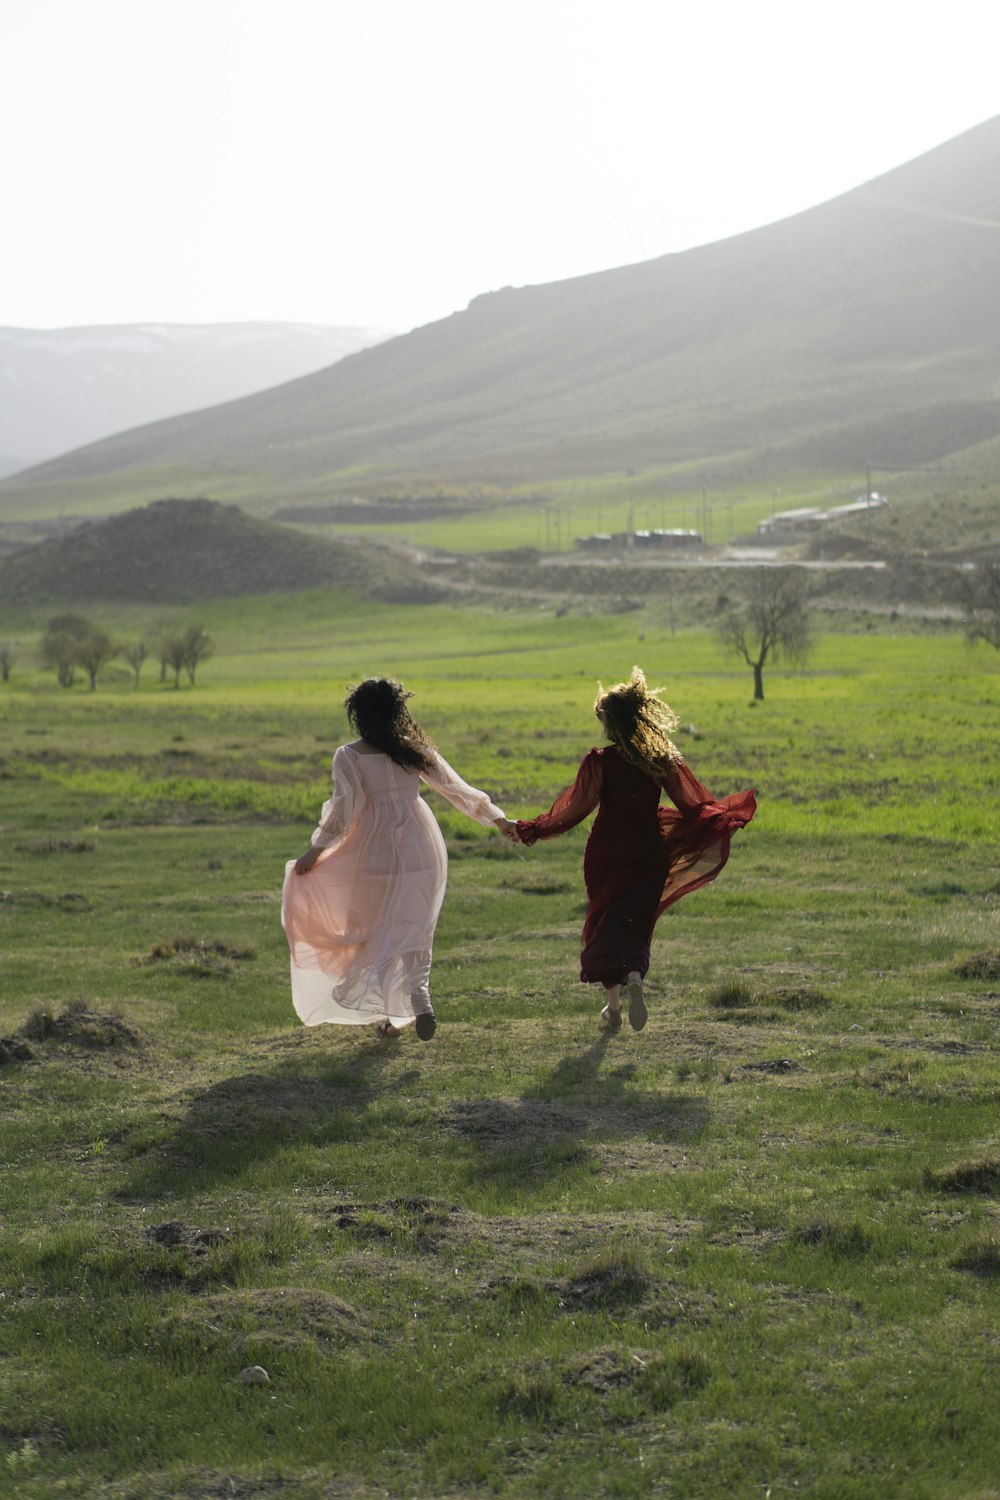 woman in white dress holding man in red robe on green grass field during daytime